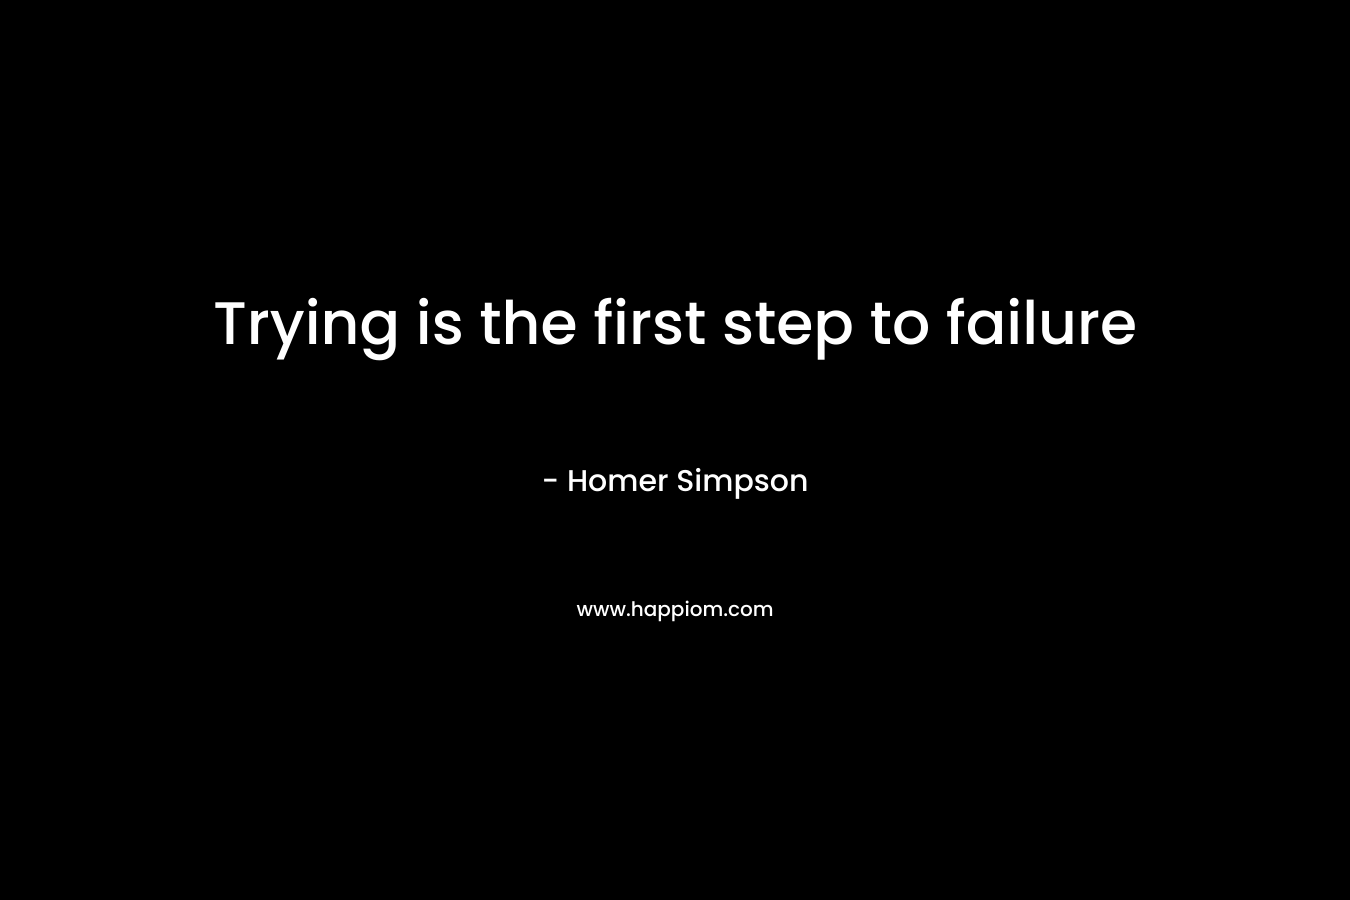 Trying is the first step to failure